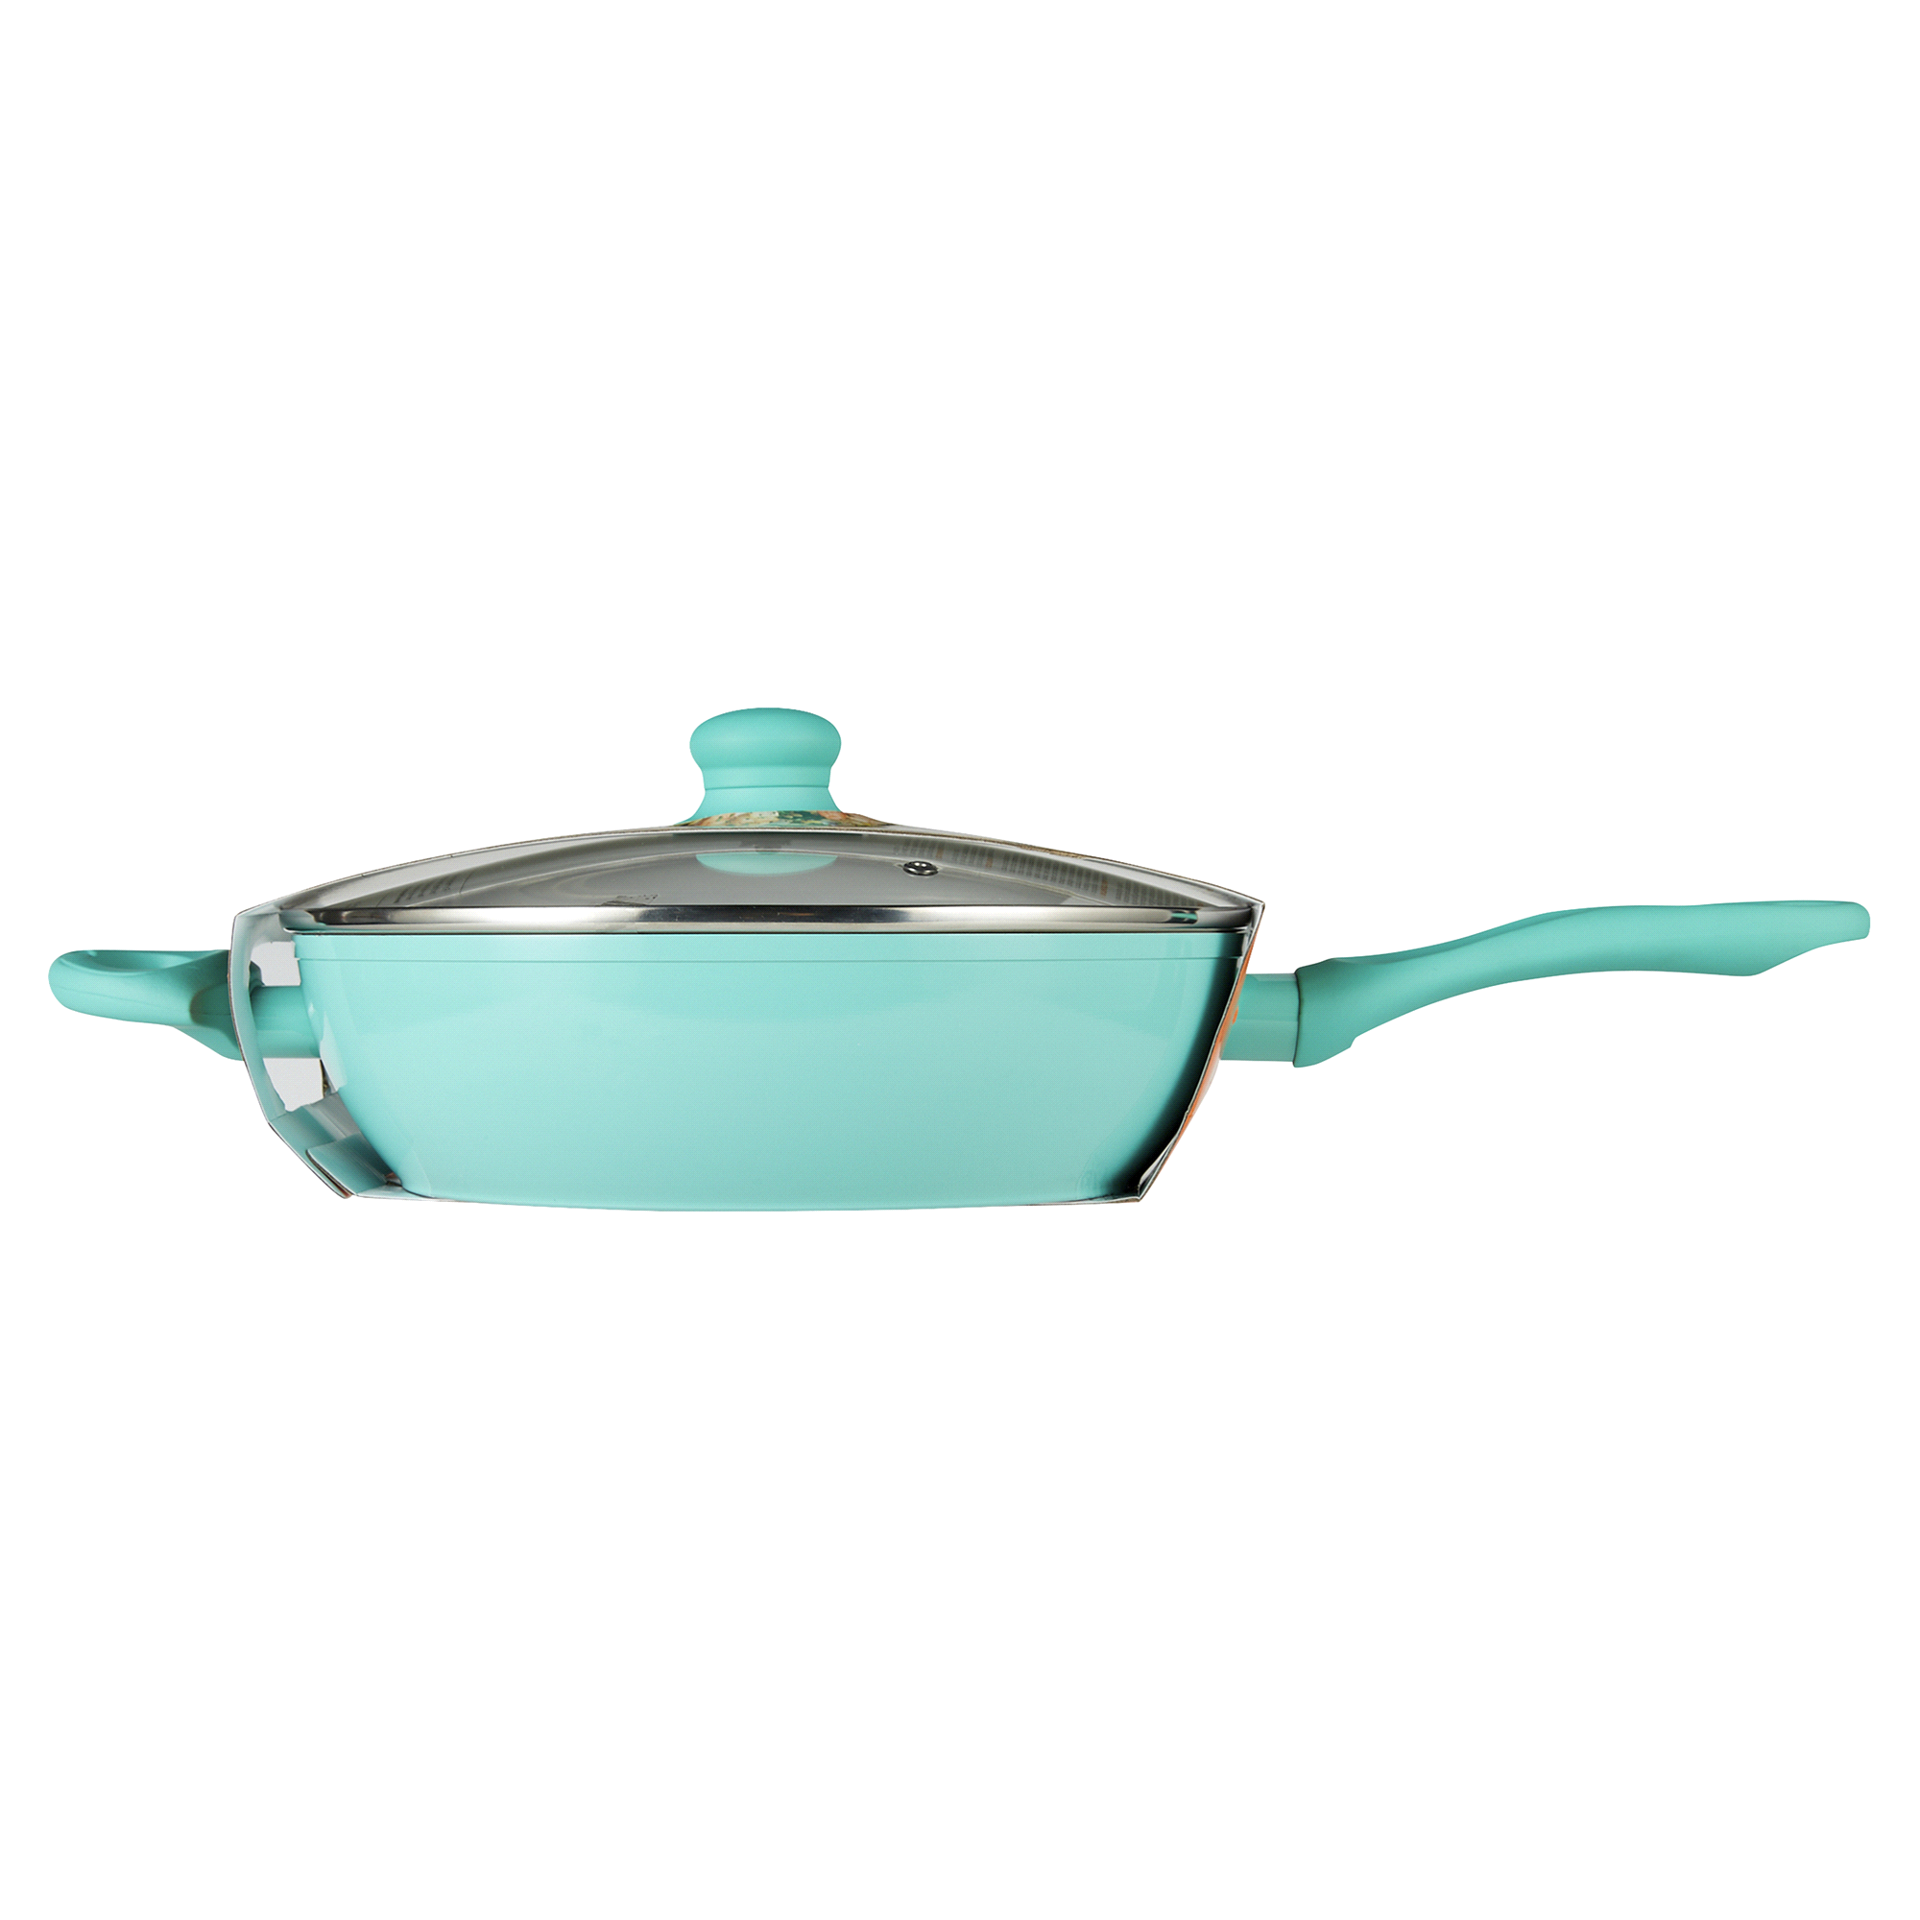 slide 26 of 29, IMUSA USA IMU-30053 Forged Teal Jumbo Cooker with Ceramic Nonstick, 4 qt